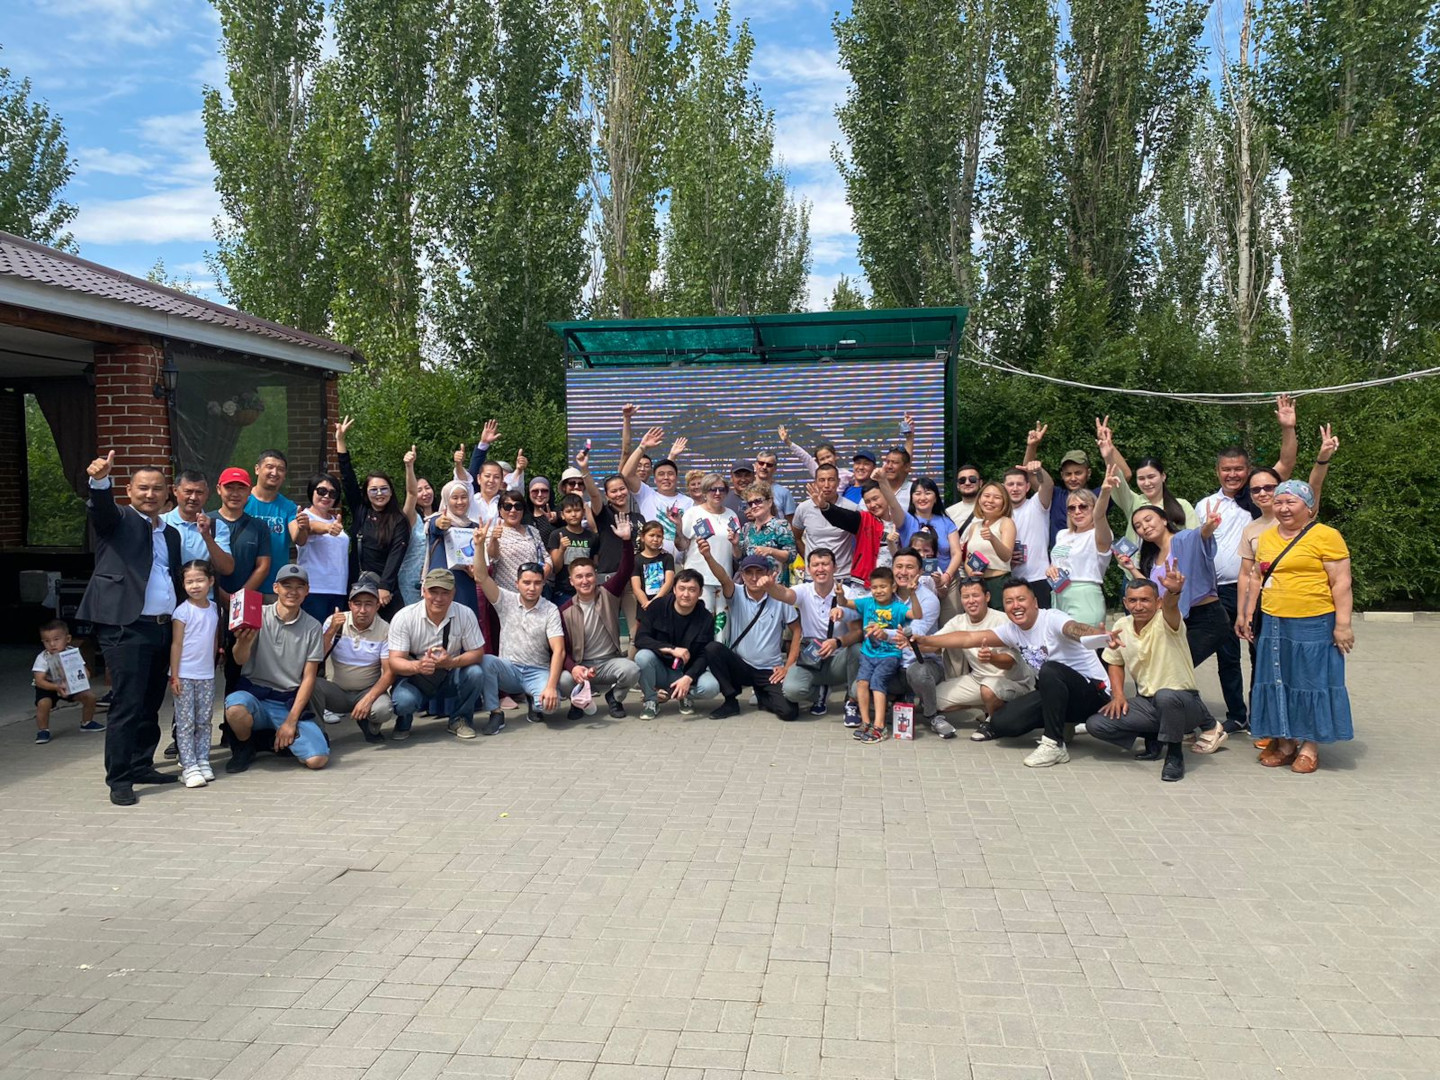 Aktobe Rail and Section Works LLP on the eve of professional holiday Metallurgist Day, celebrated its 10th anniversary at recreation center Zhety Kazyna.